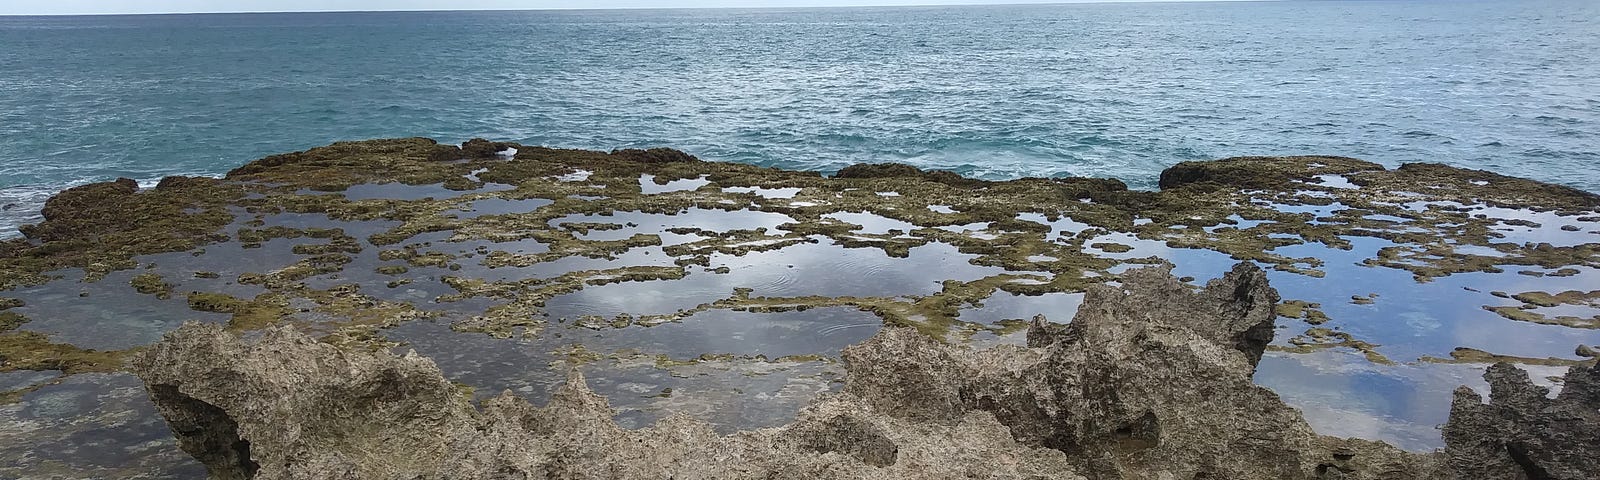 photo looking out over lava rock tide pools at Mermaid Caves area of Oahu, Hawaii